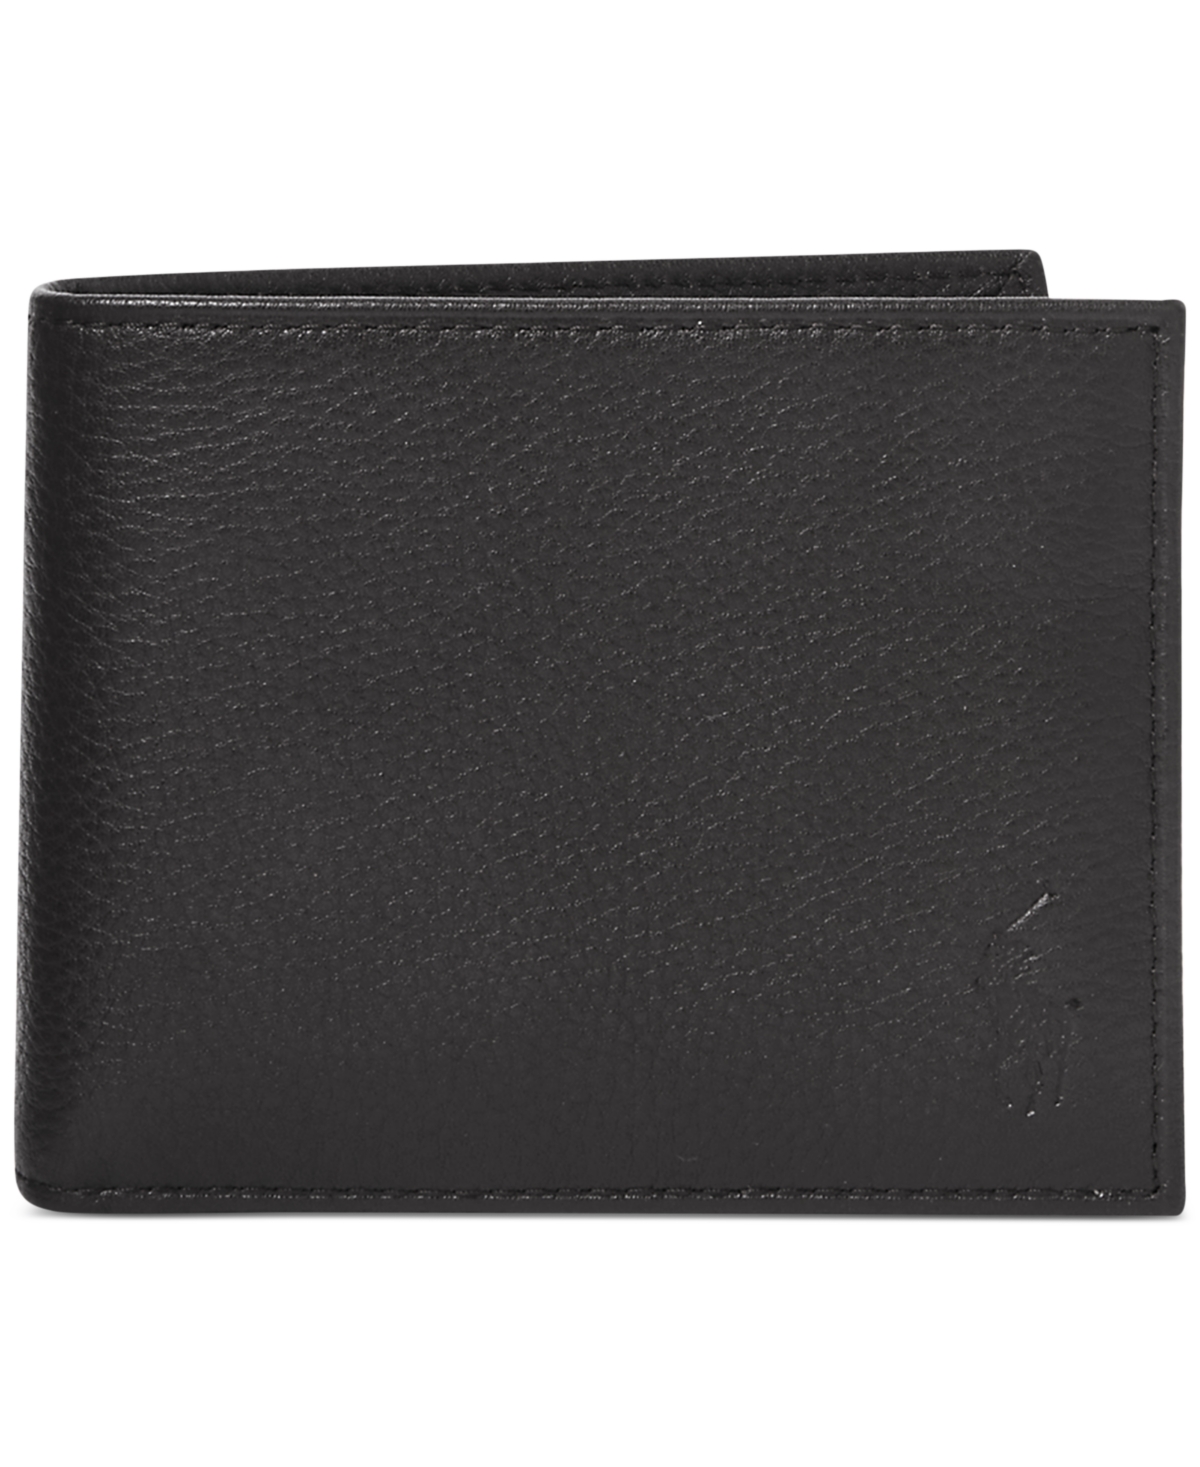 Men's Pebbled Leather Passcase - Brown